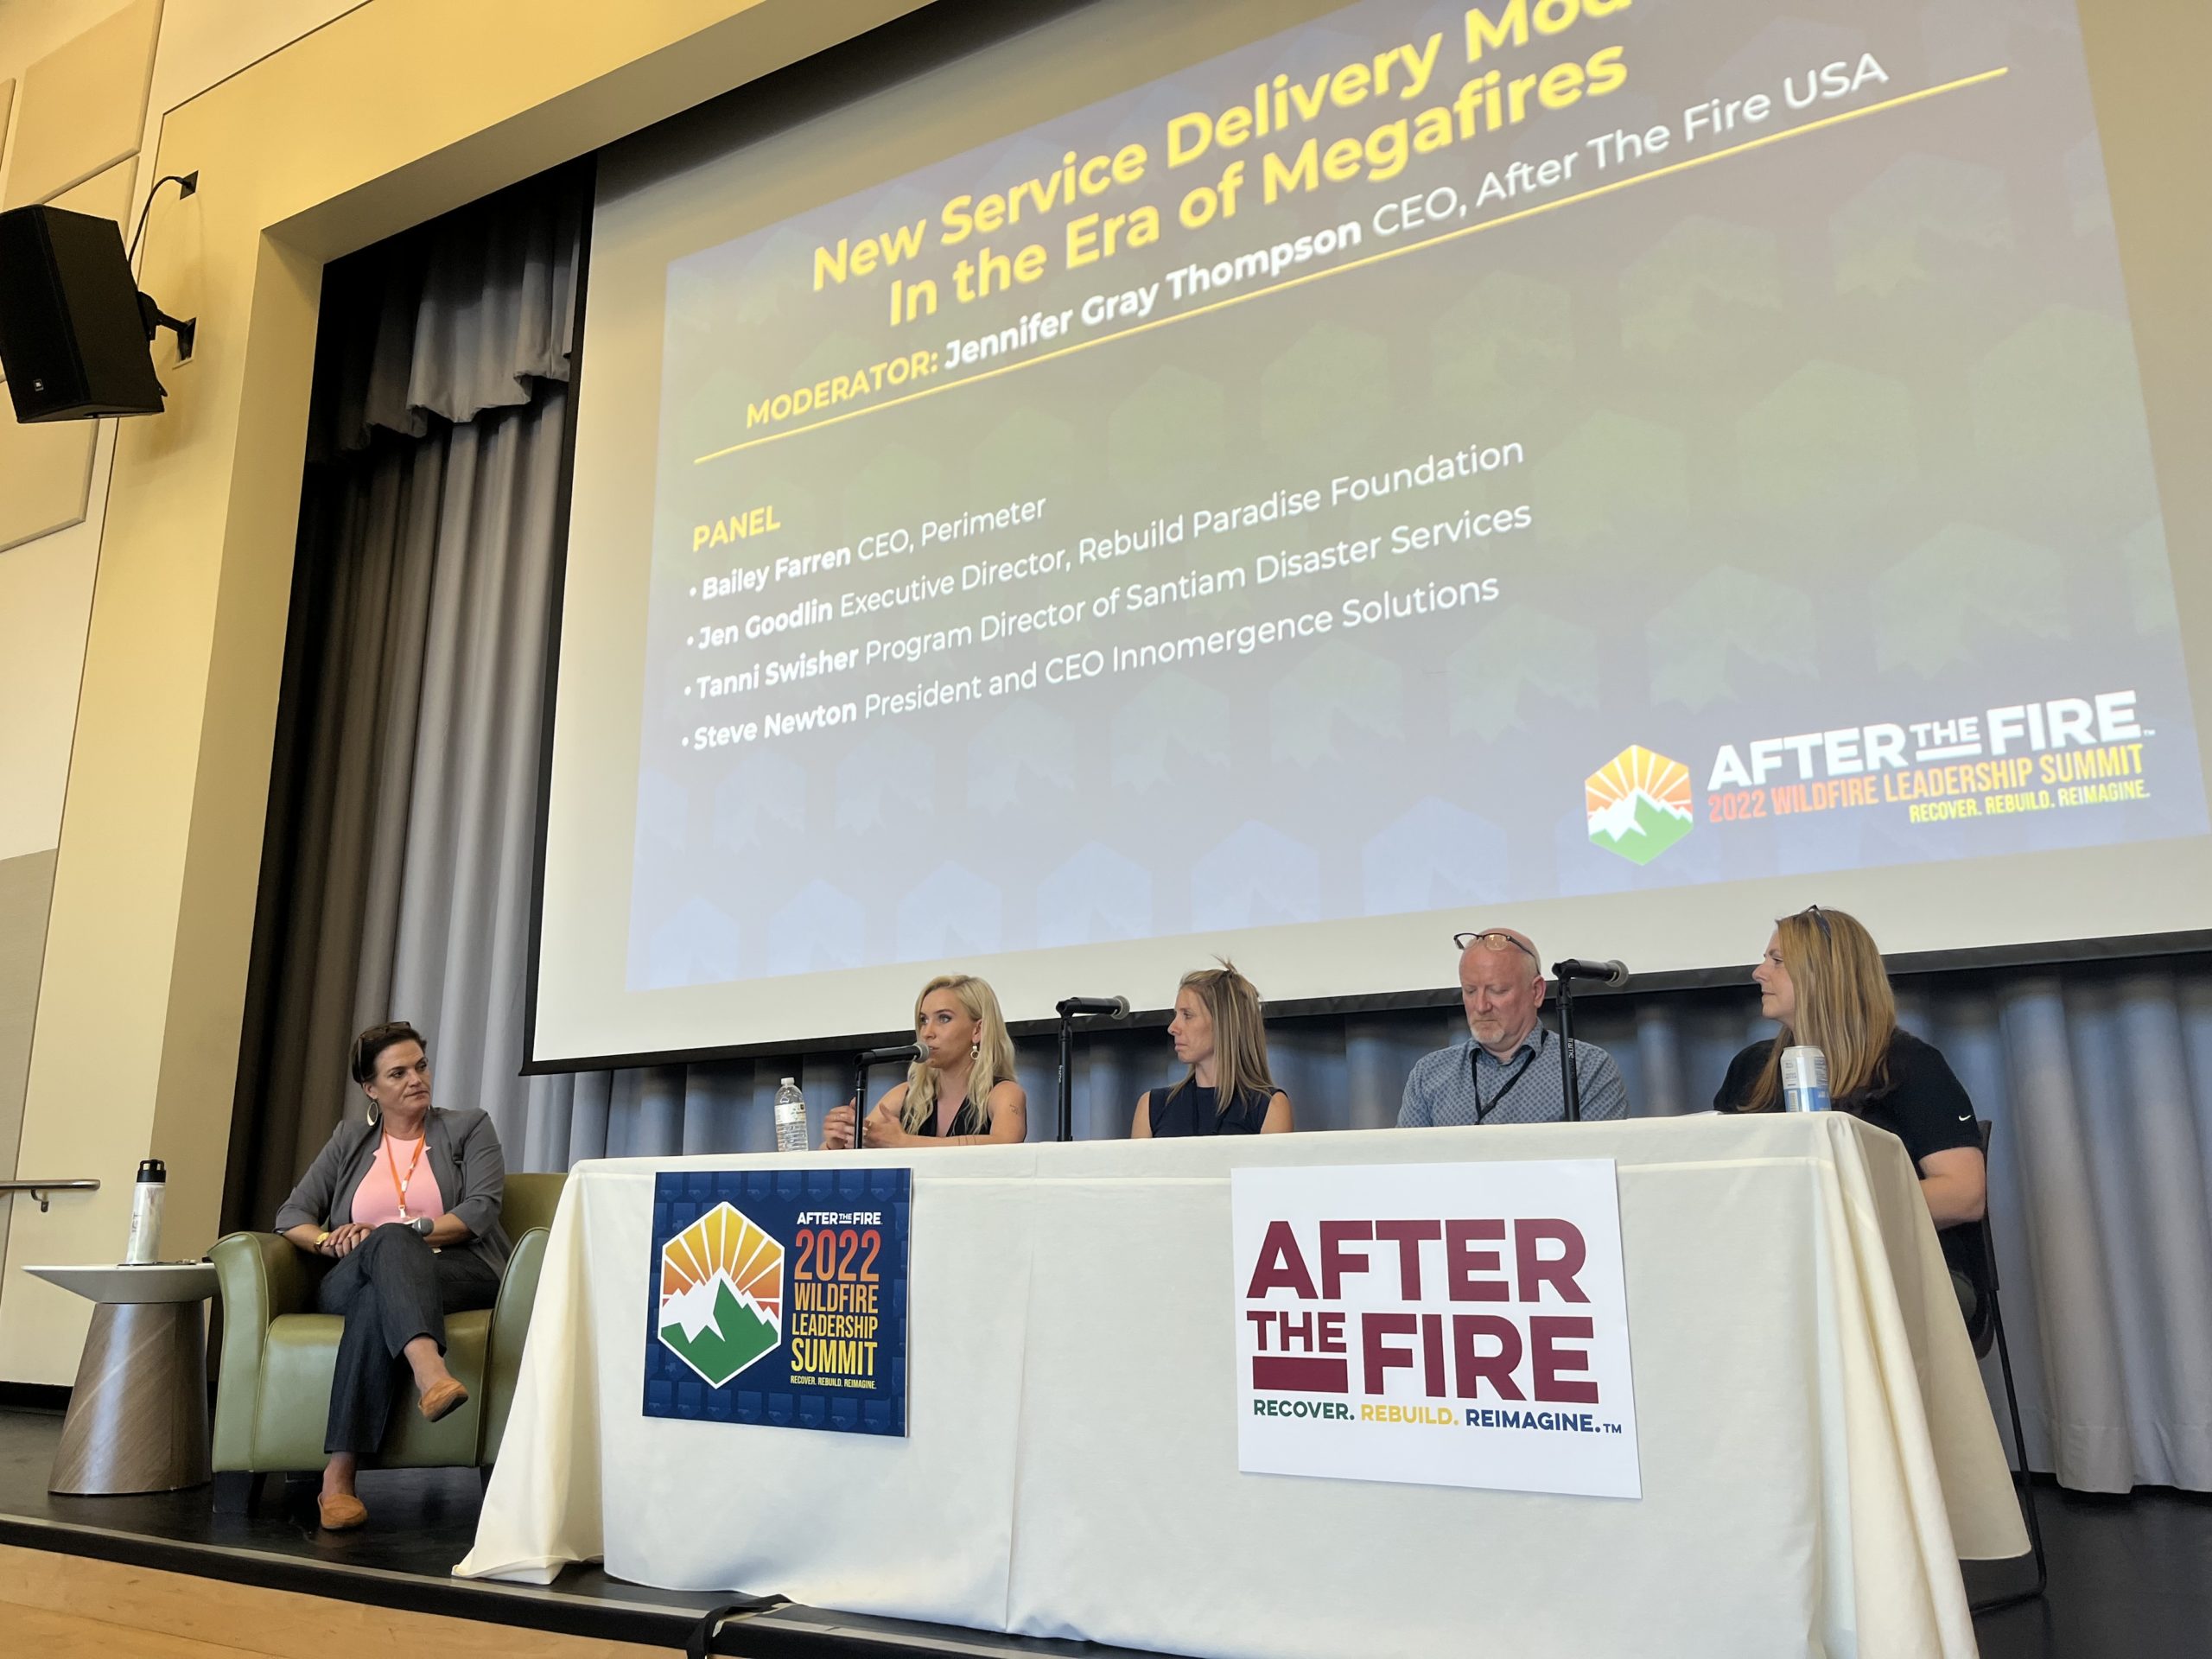 Jennifer Gray Thompson moderated a panel highlighting new service delivery methods